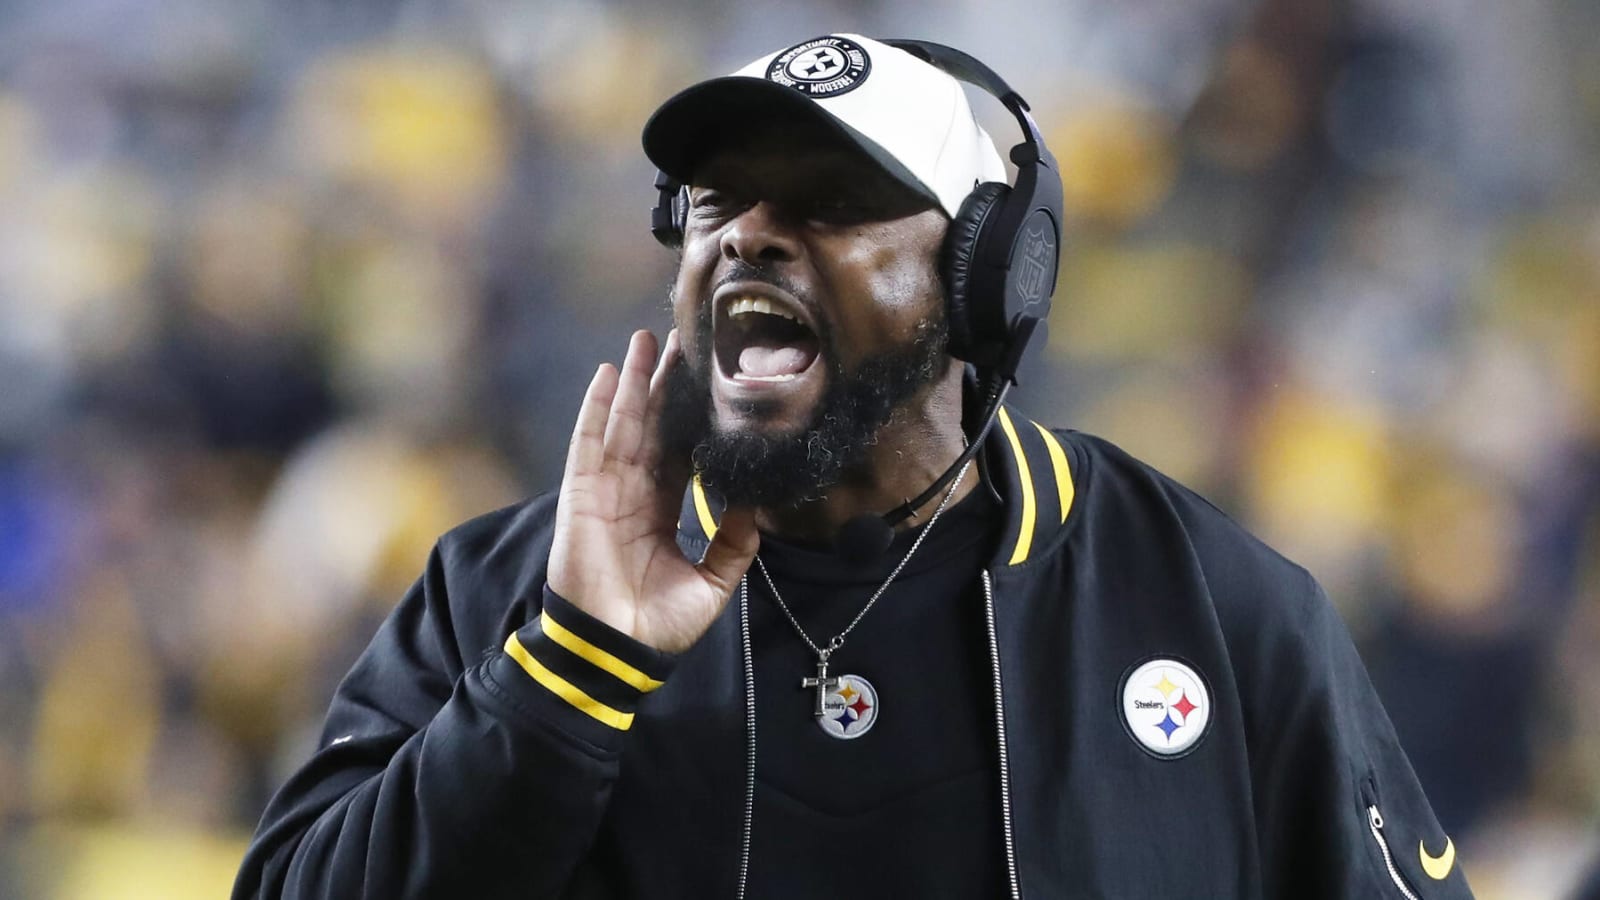 Could Steelers consider trading Mike Tomlin?